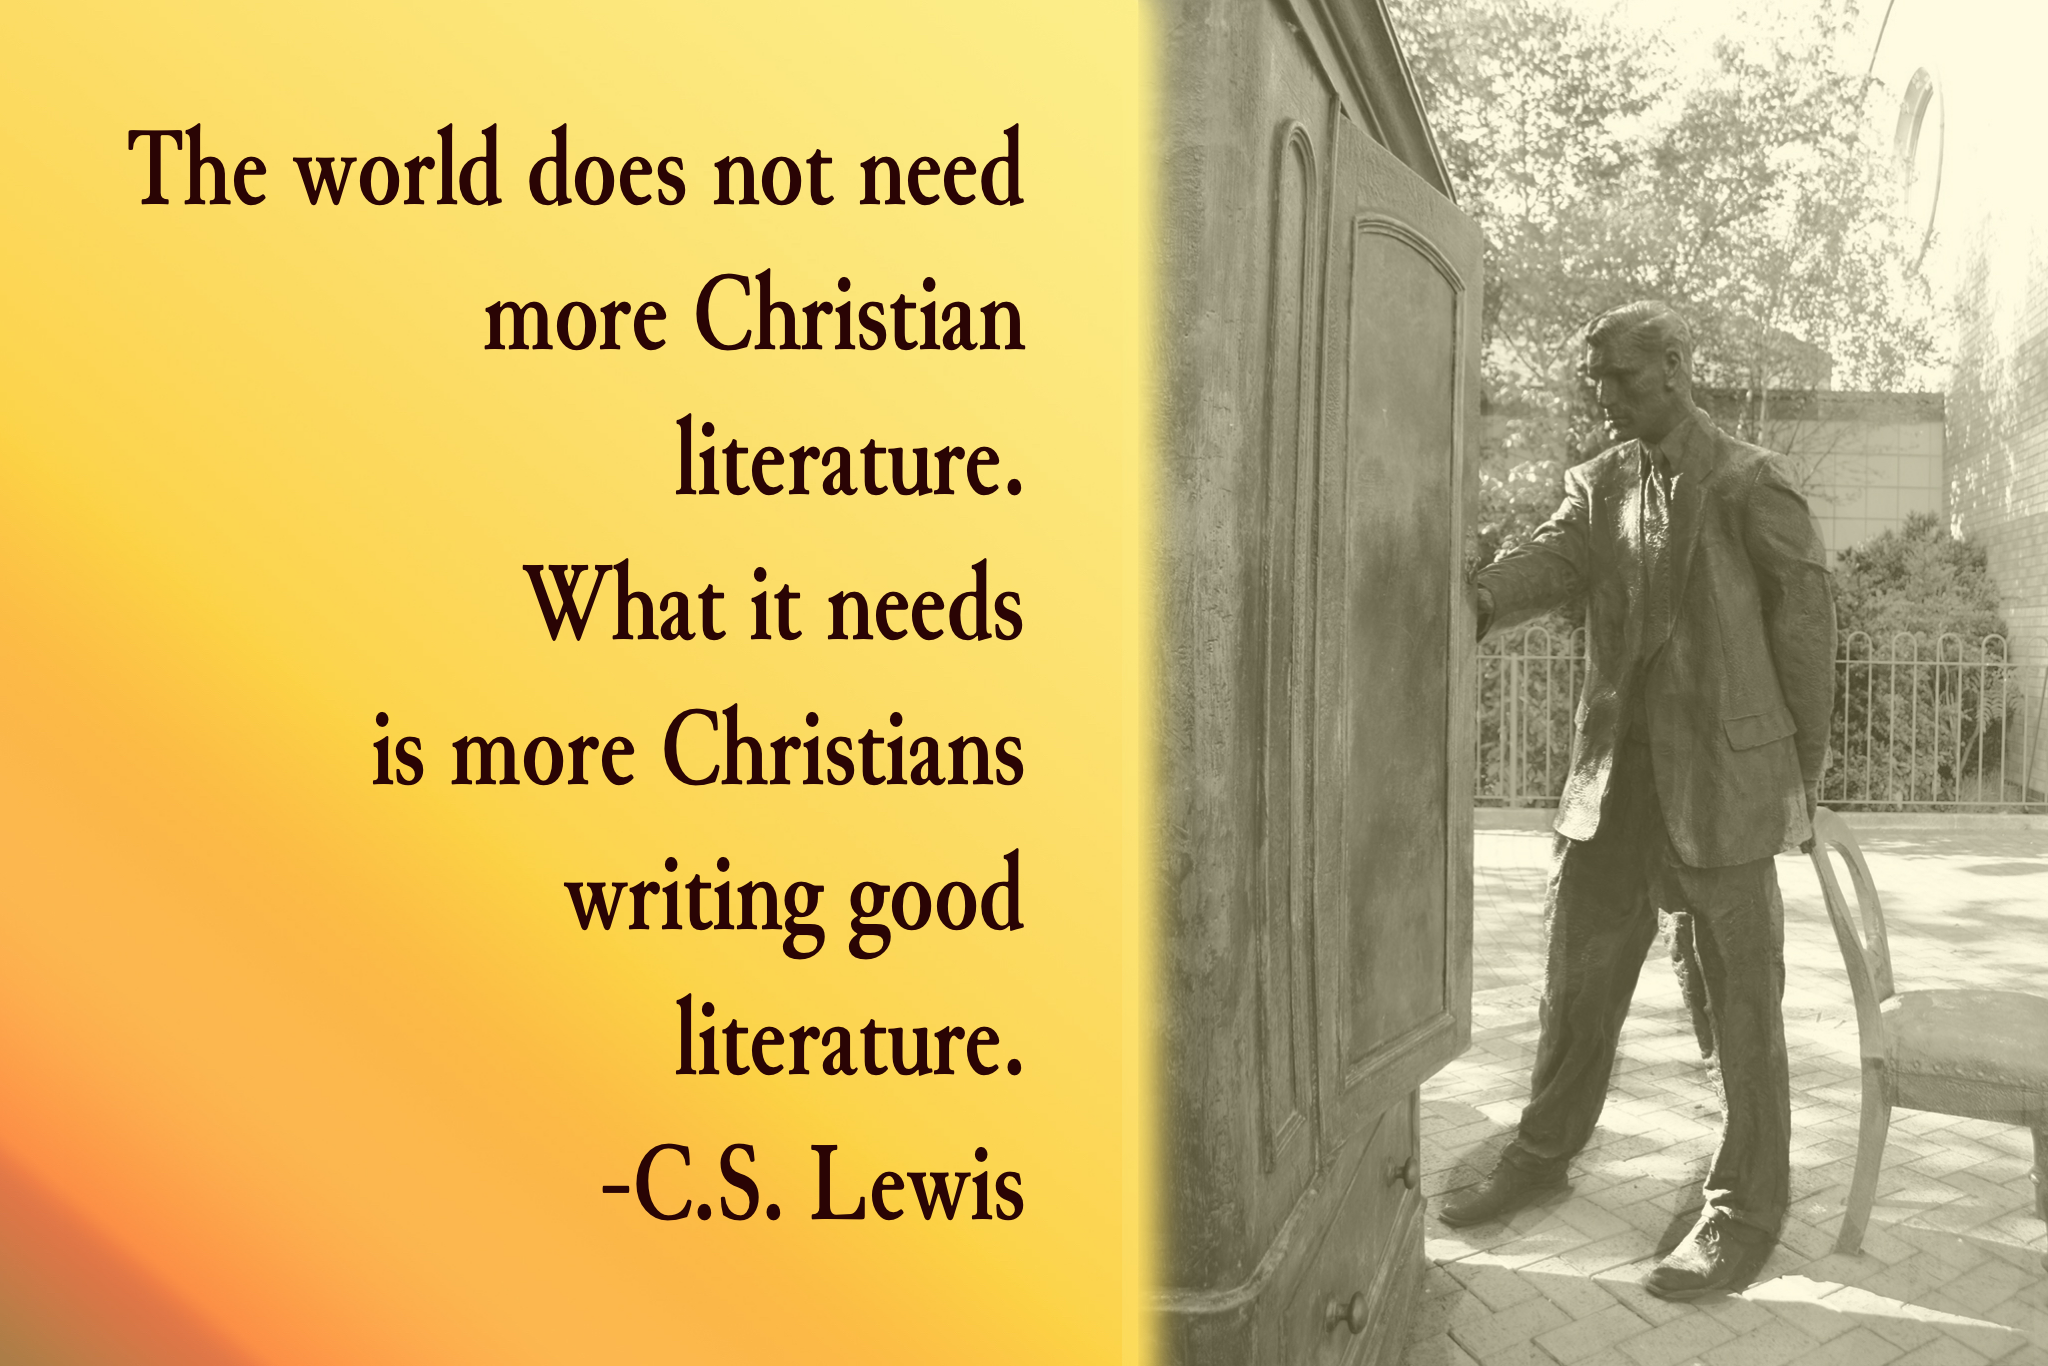 C.S. Lewis quote: "The world does not need more Christian literature. What it needs is more Christians writing good literature."